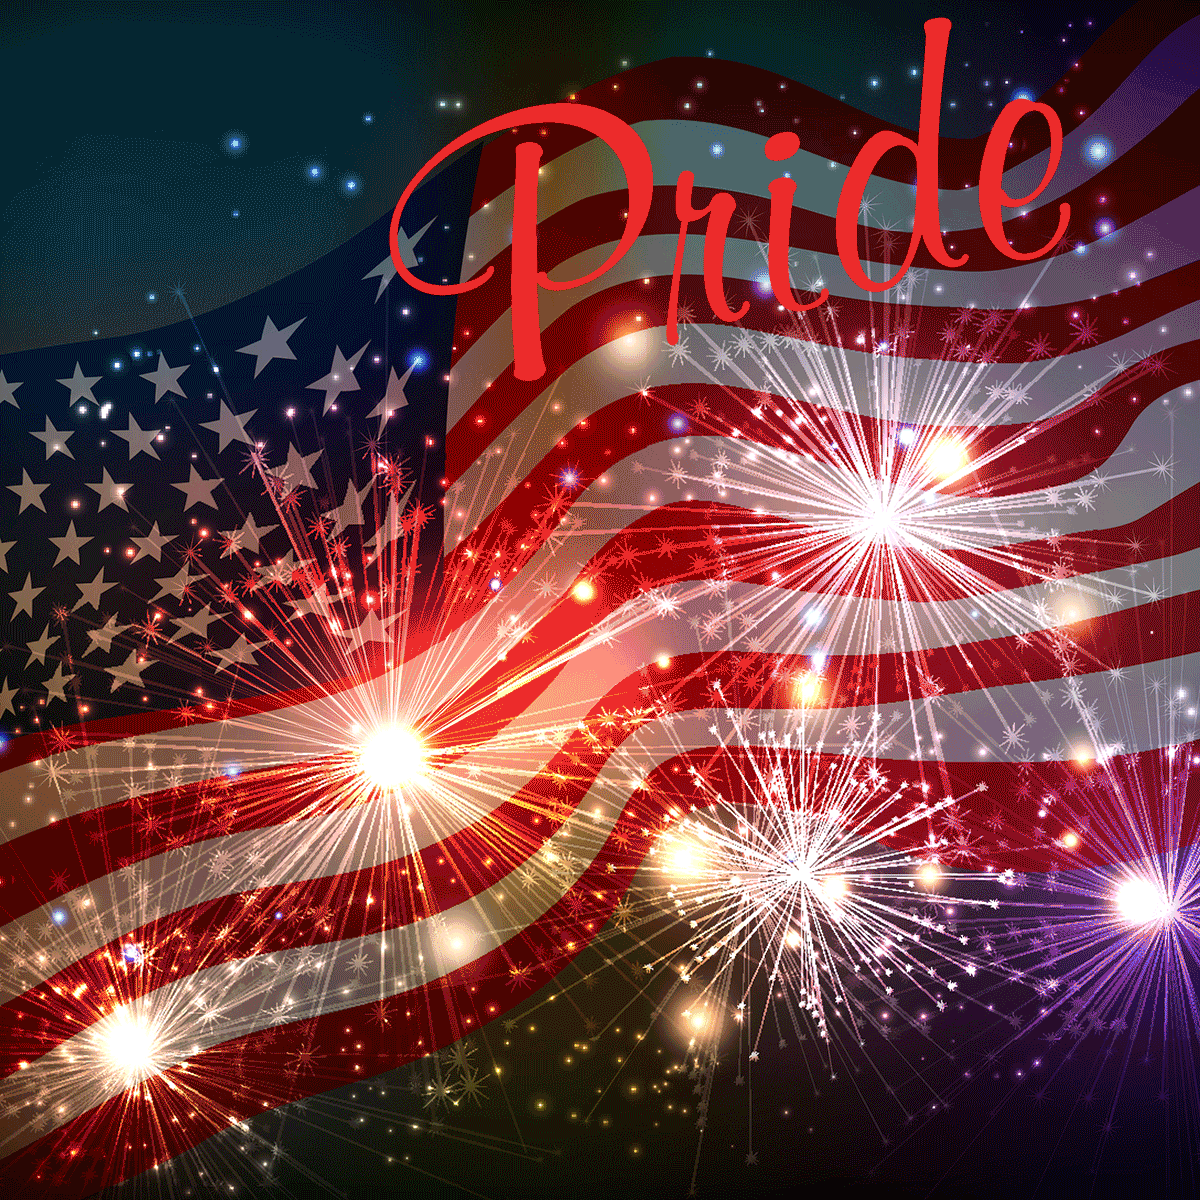 Pride, Independence, Freedom, Loyalty, Strength, Happy 4th of July from Linda Horn